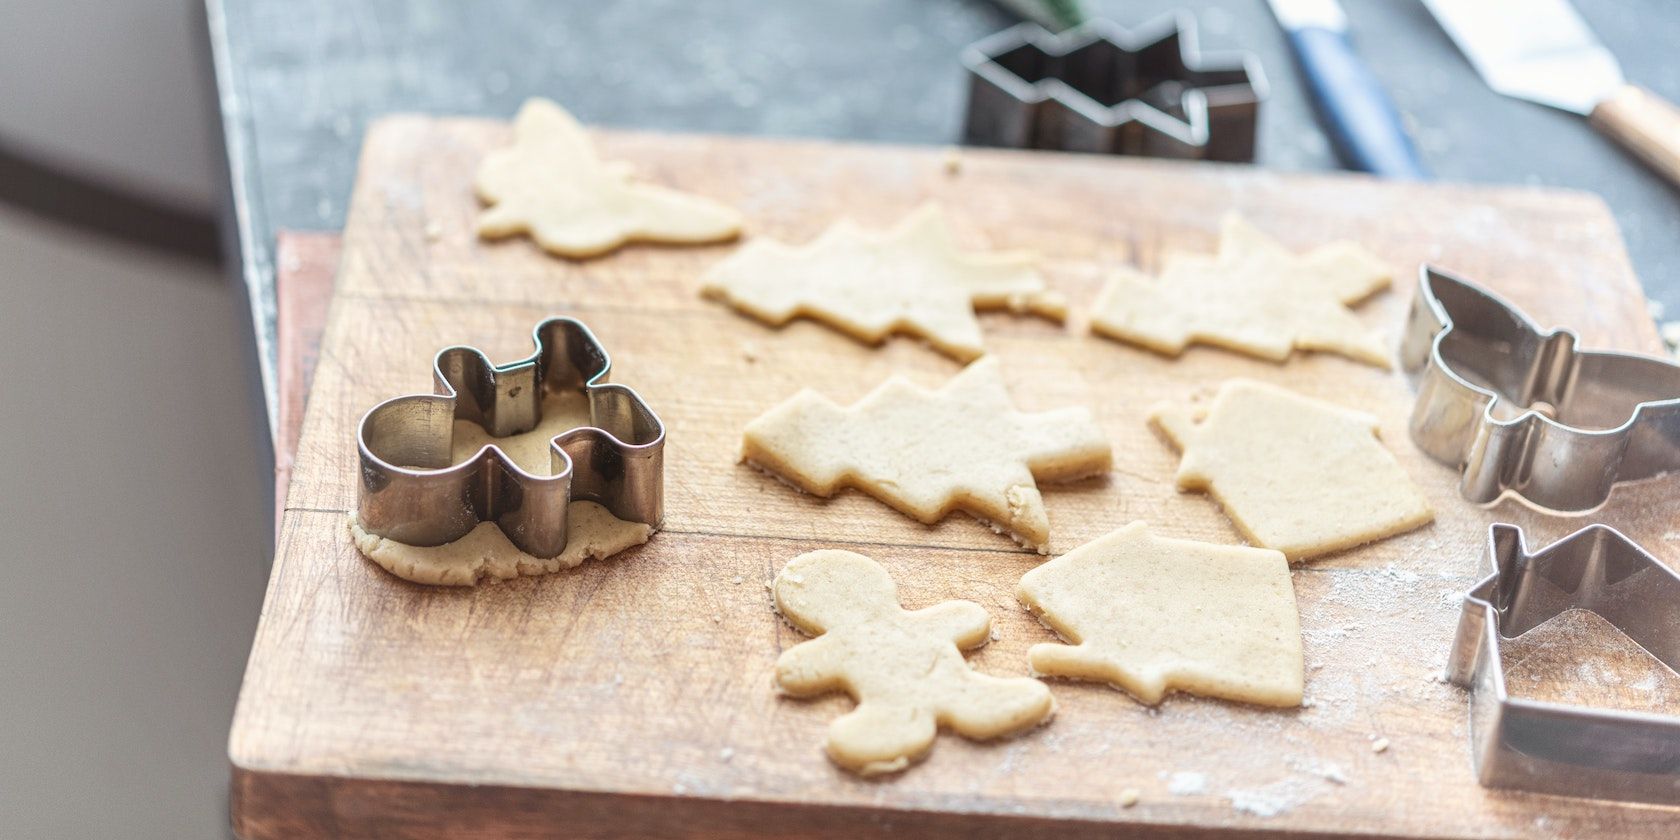 A photograph of metal cookie cutters with several shapes cut out of dough